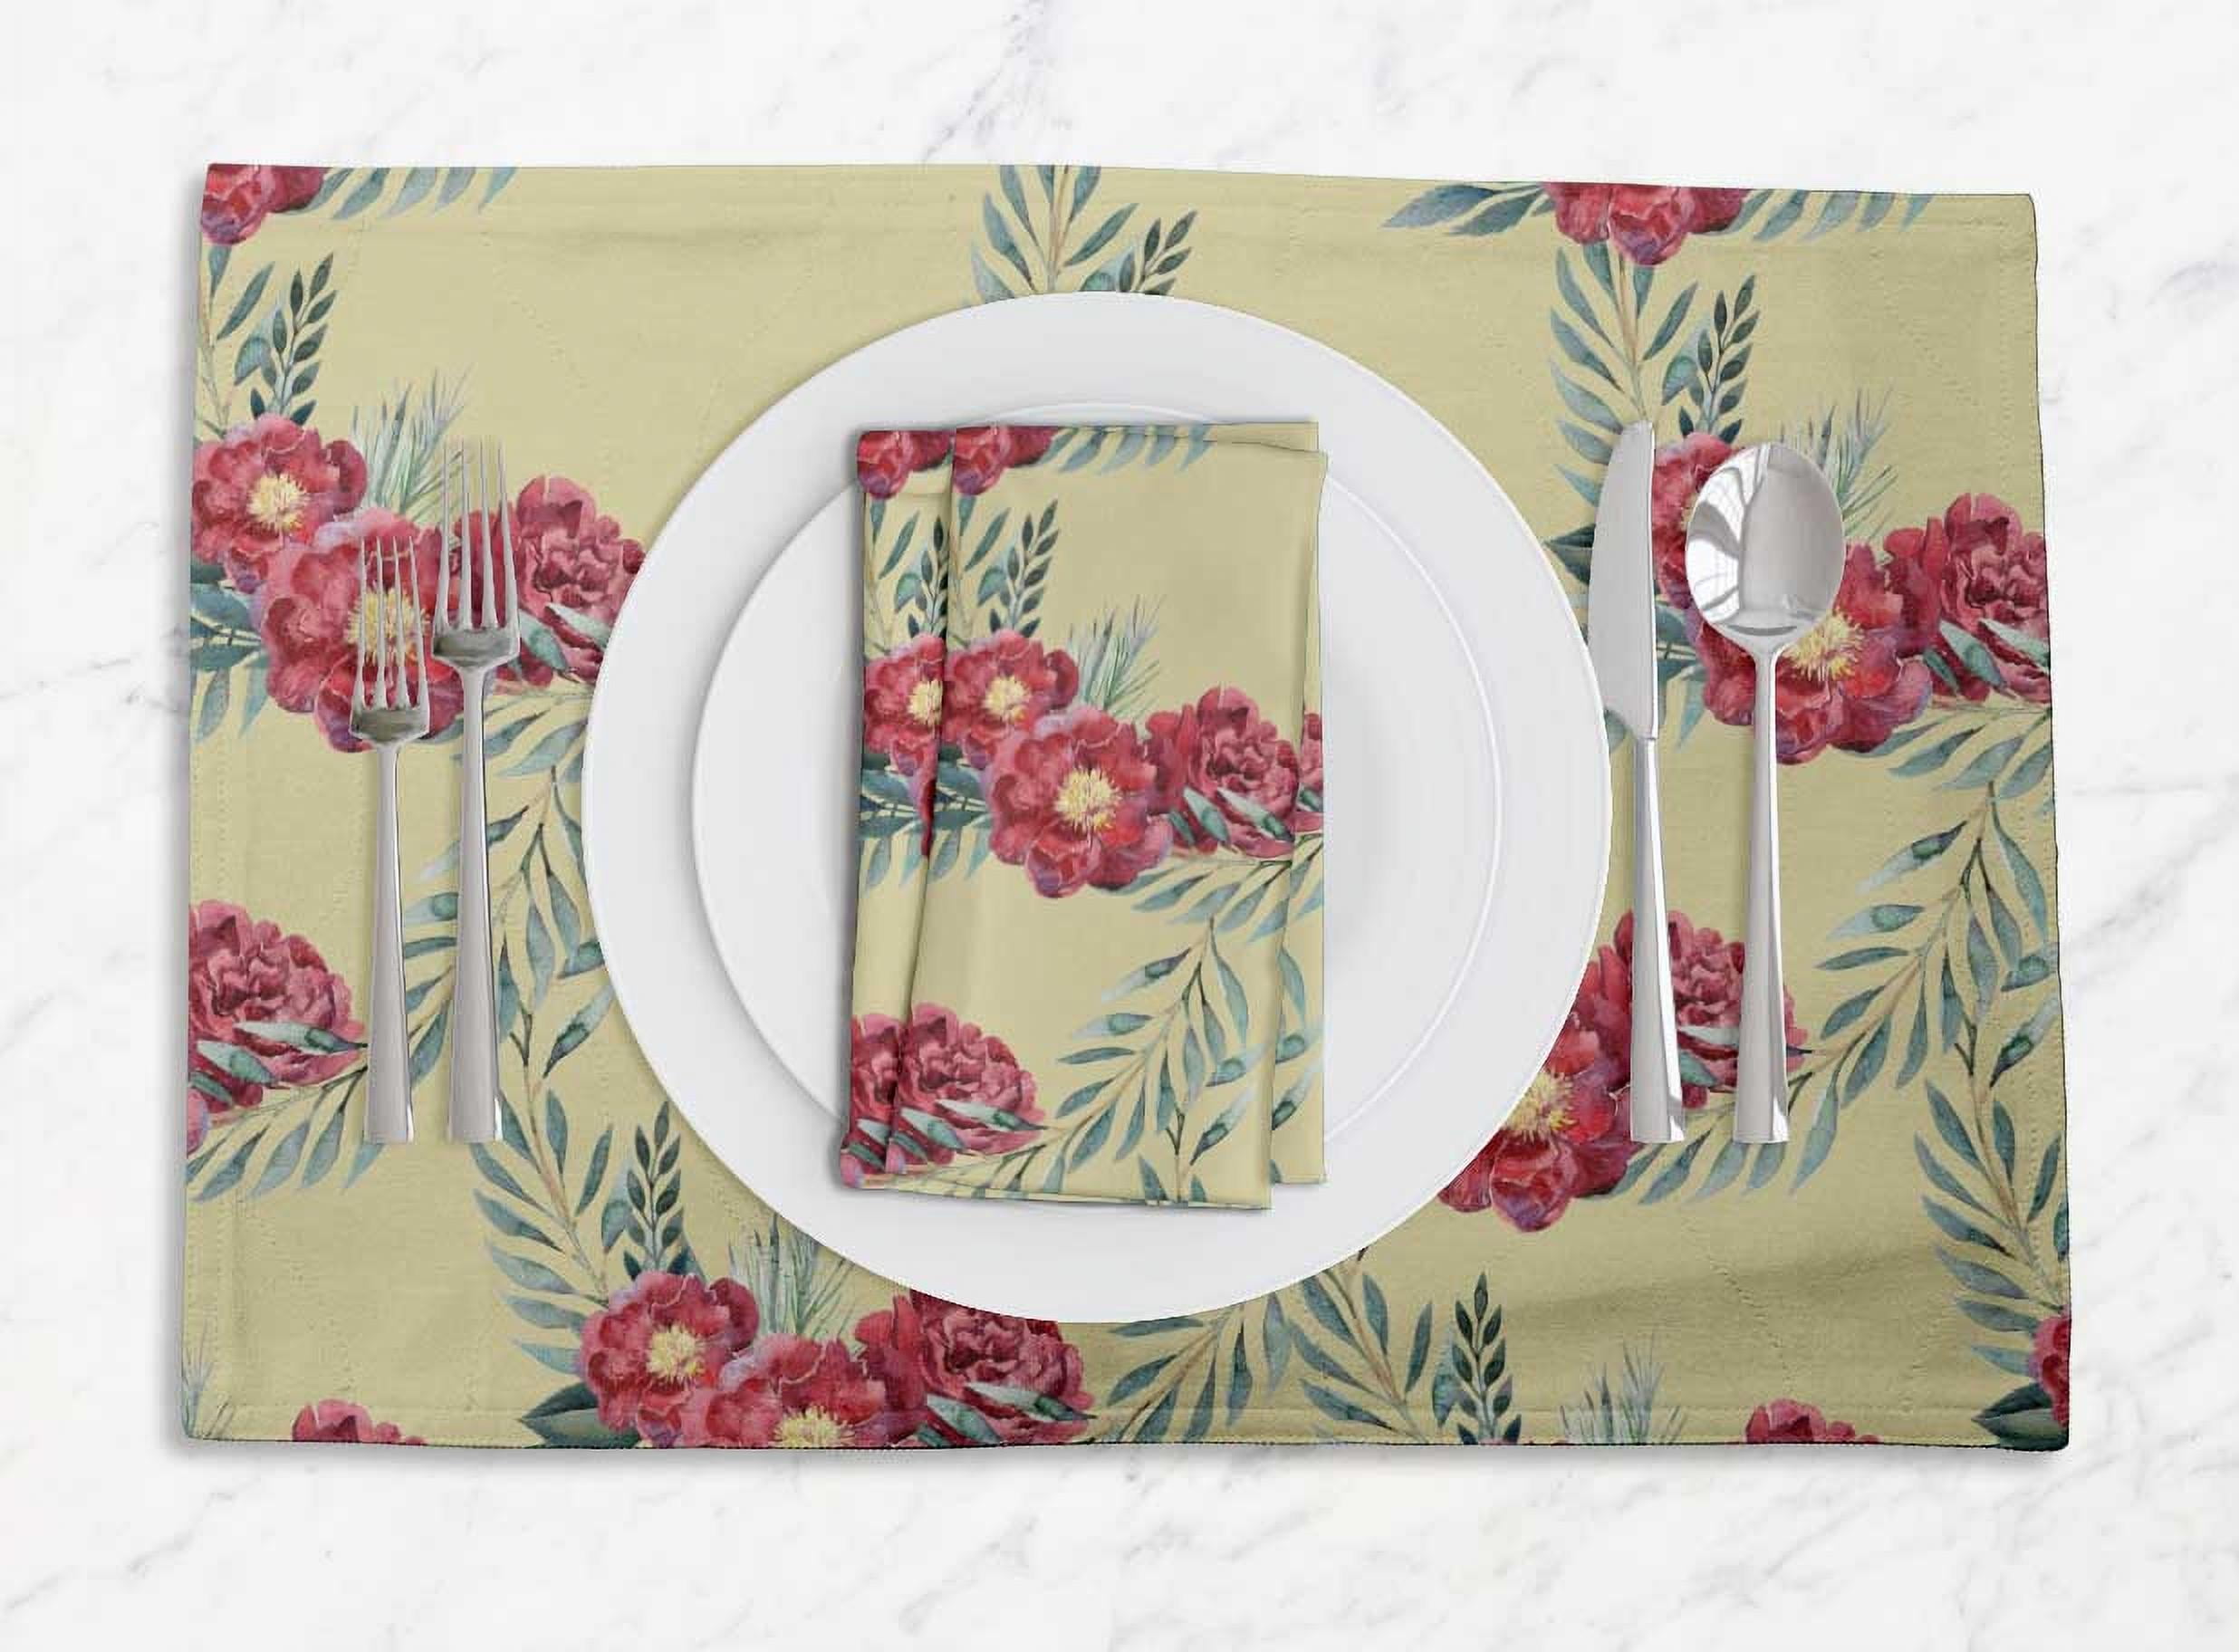 Details about   S4Sassy Leaves & Peony Floral Placemats & Napkins Table Decor Mats-FL-841C 